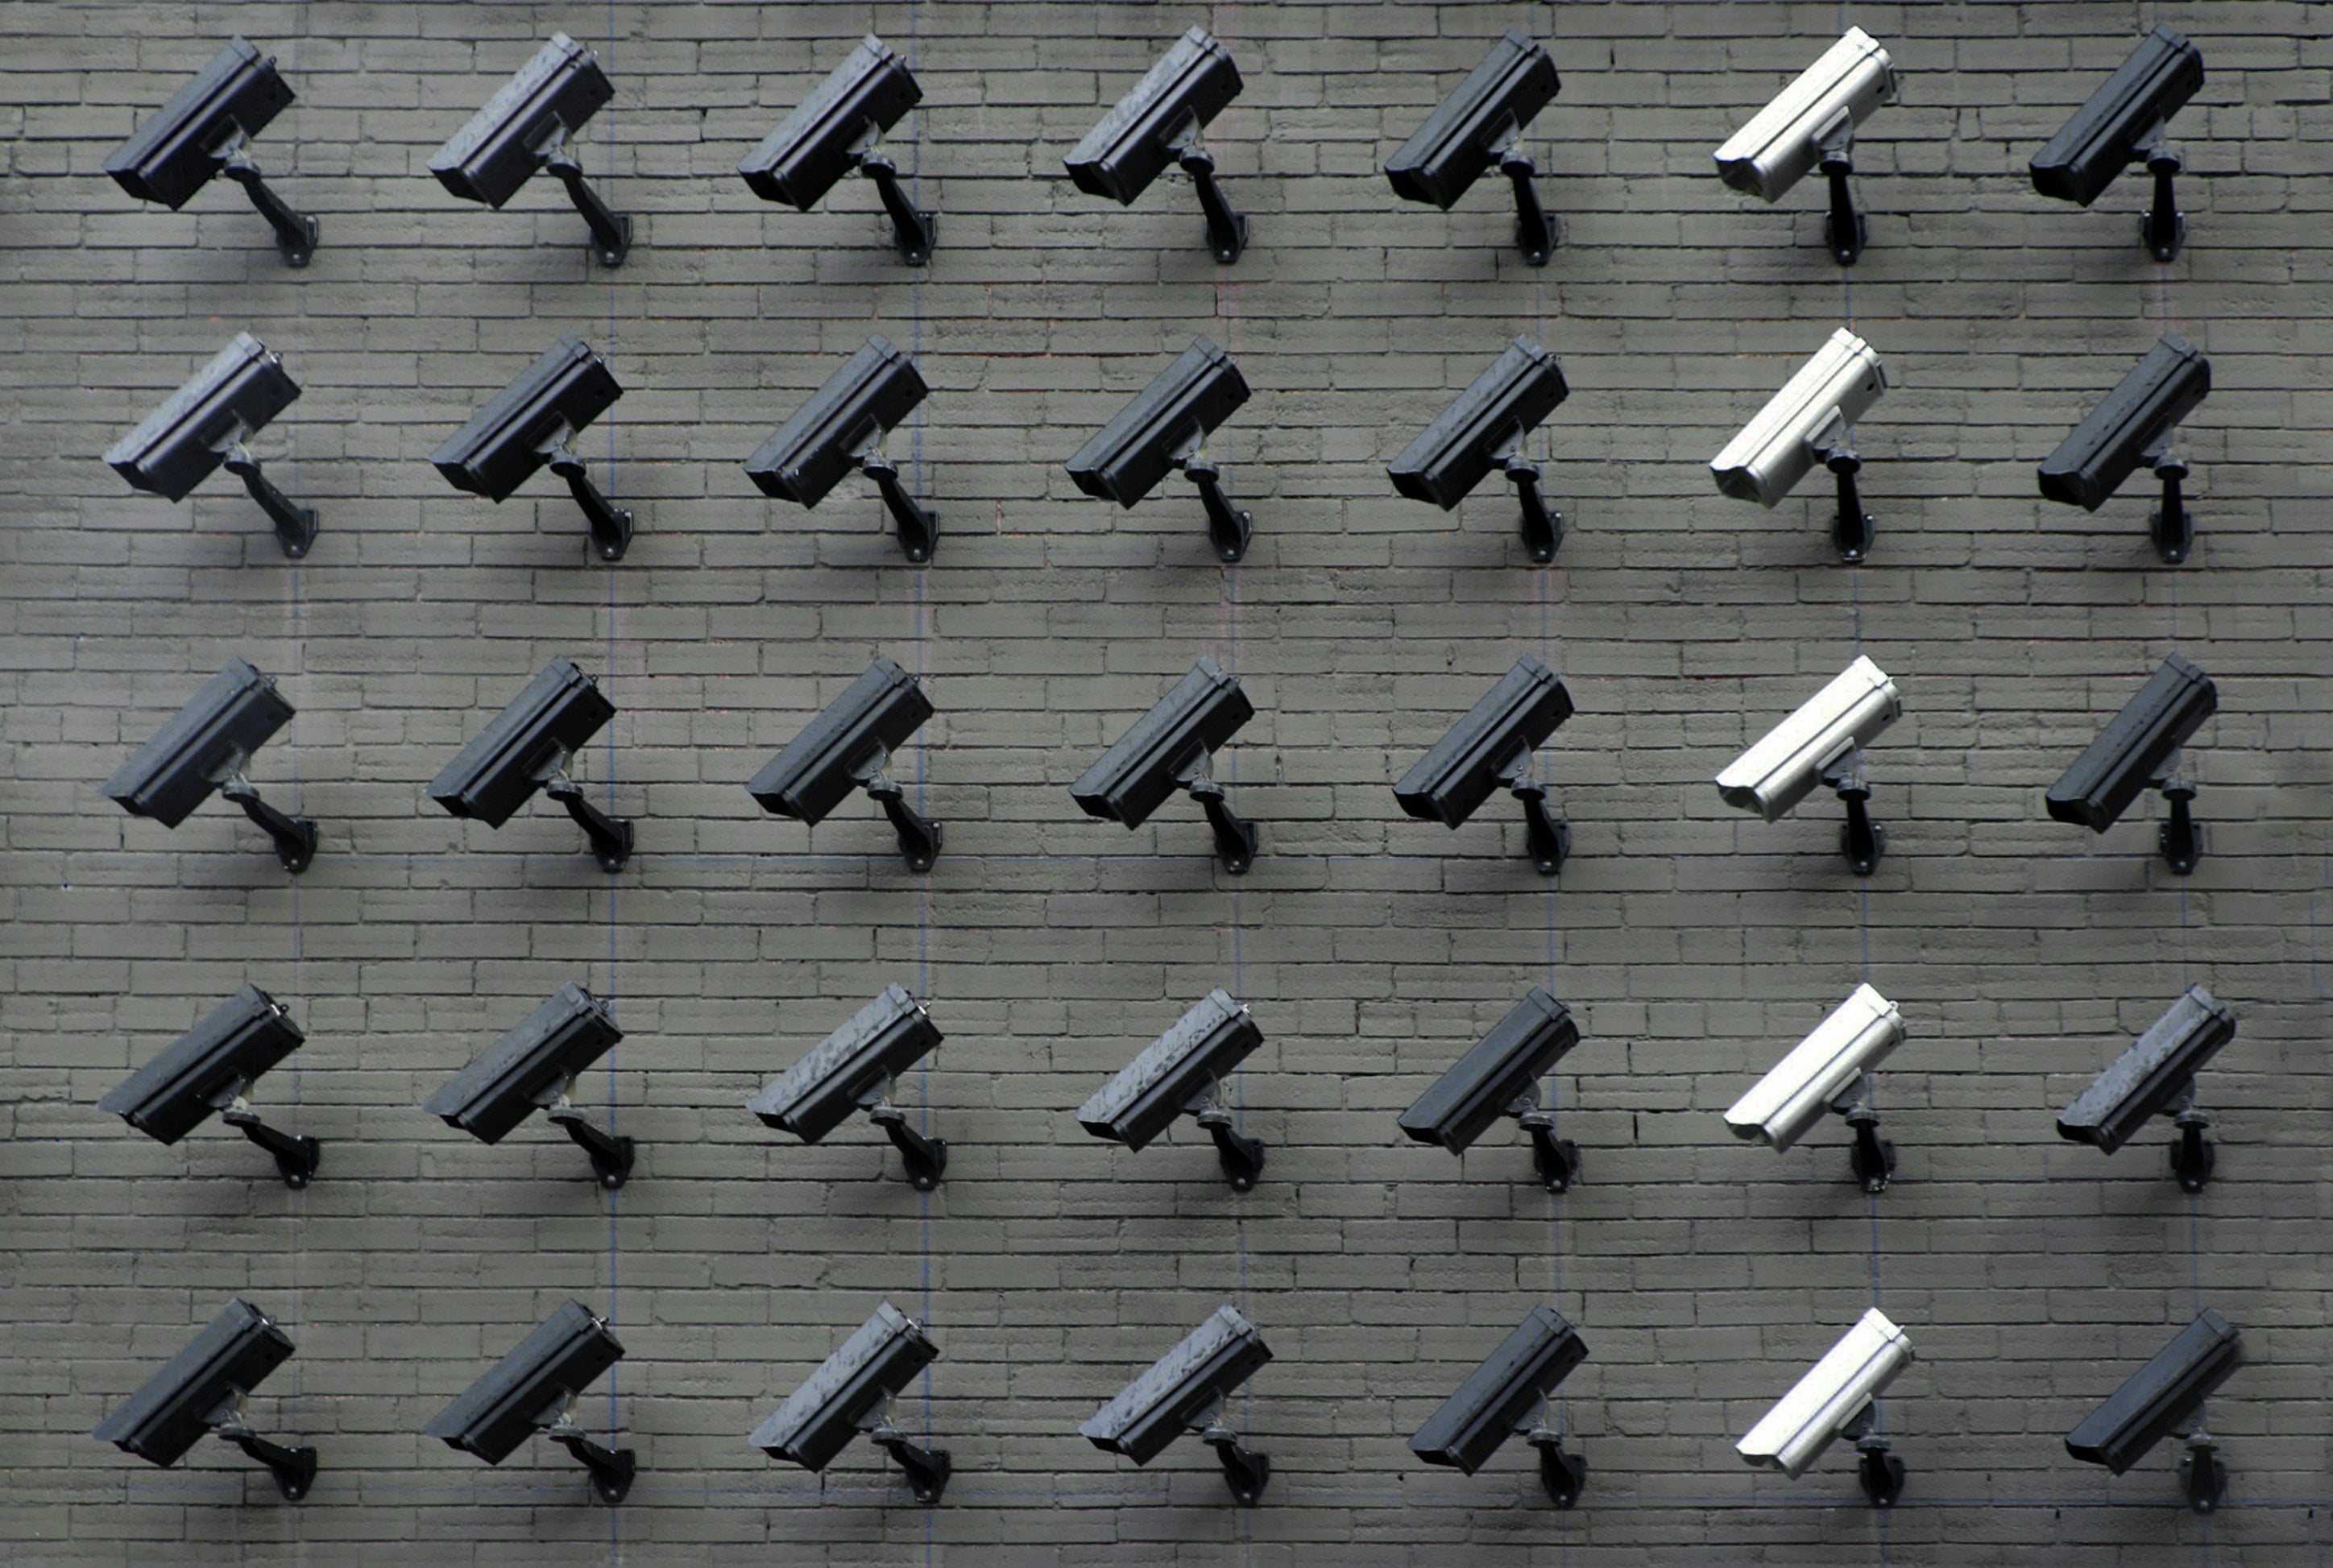 A brick wall of surveillance cameras arranged in an aesthetically perfect grid.